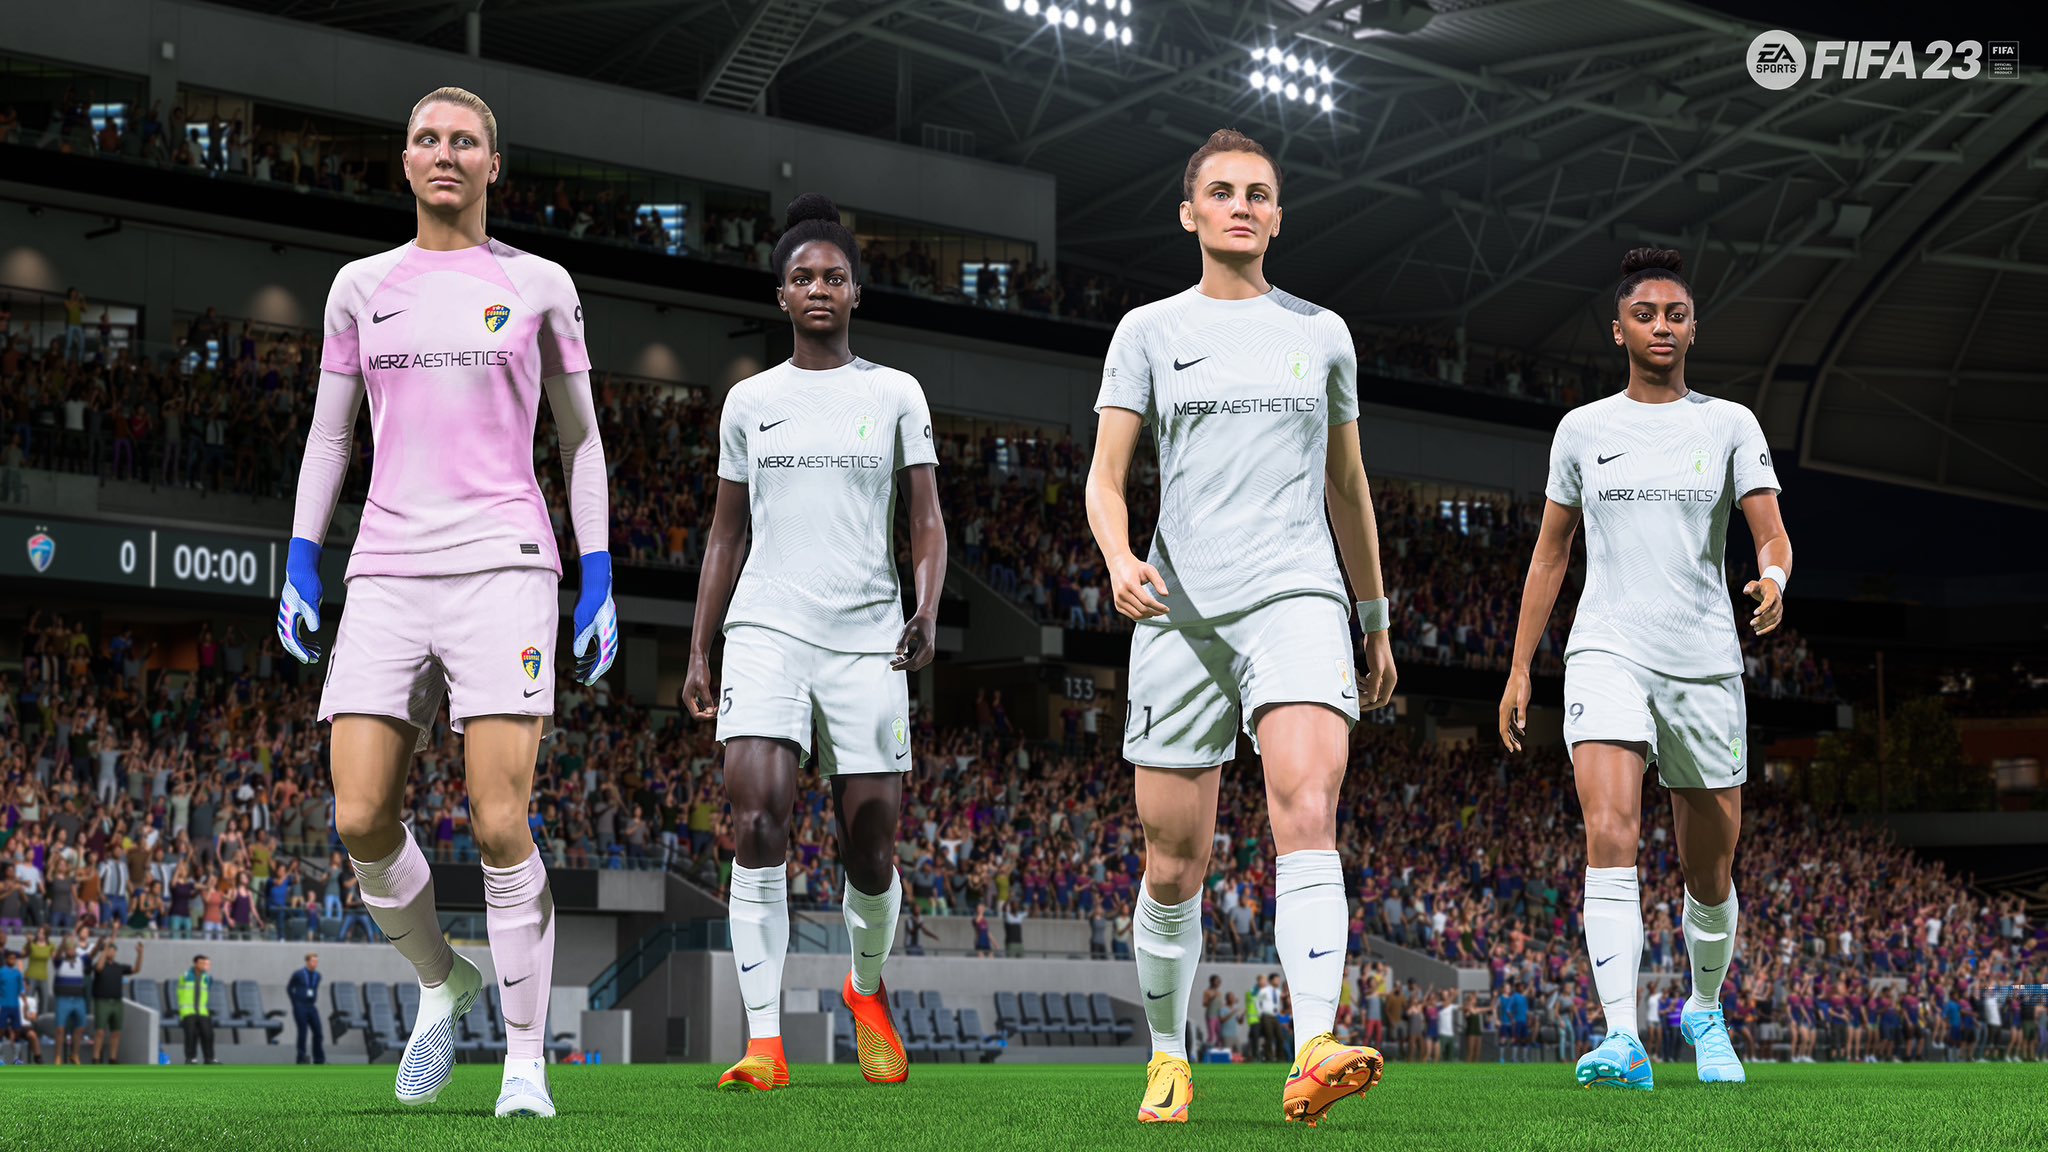 Play The World's Game With FIFA 23, Arriving on The Play List